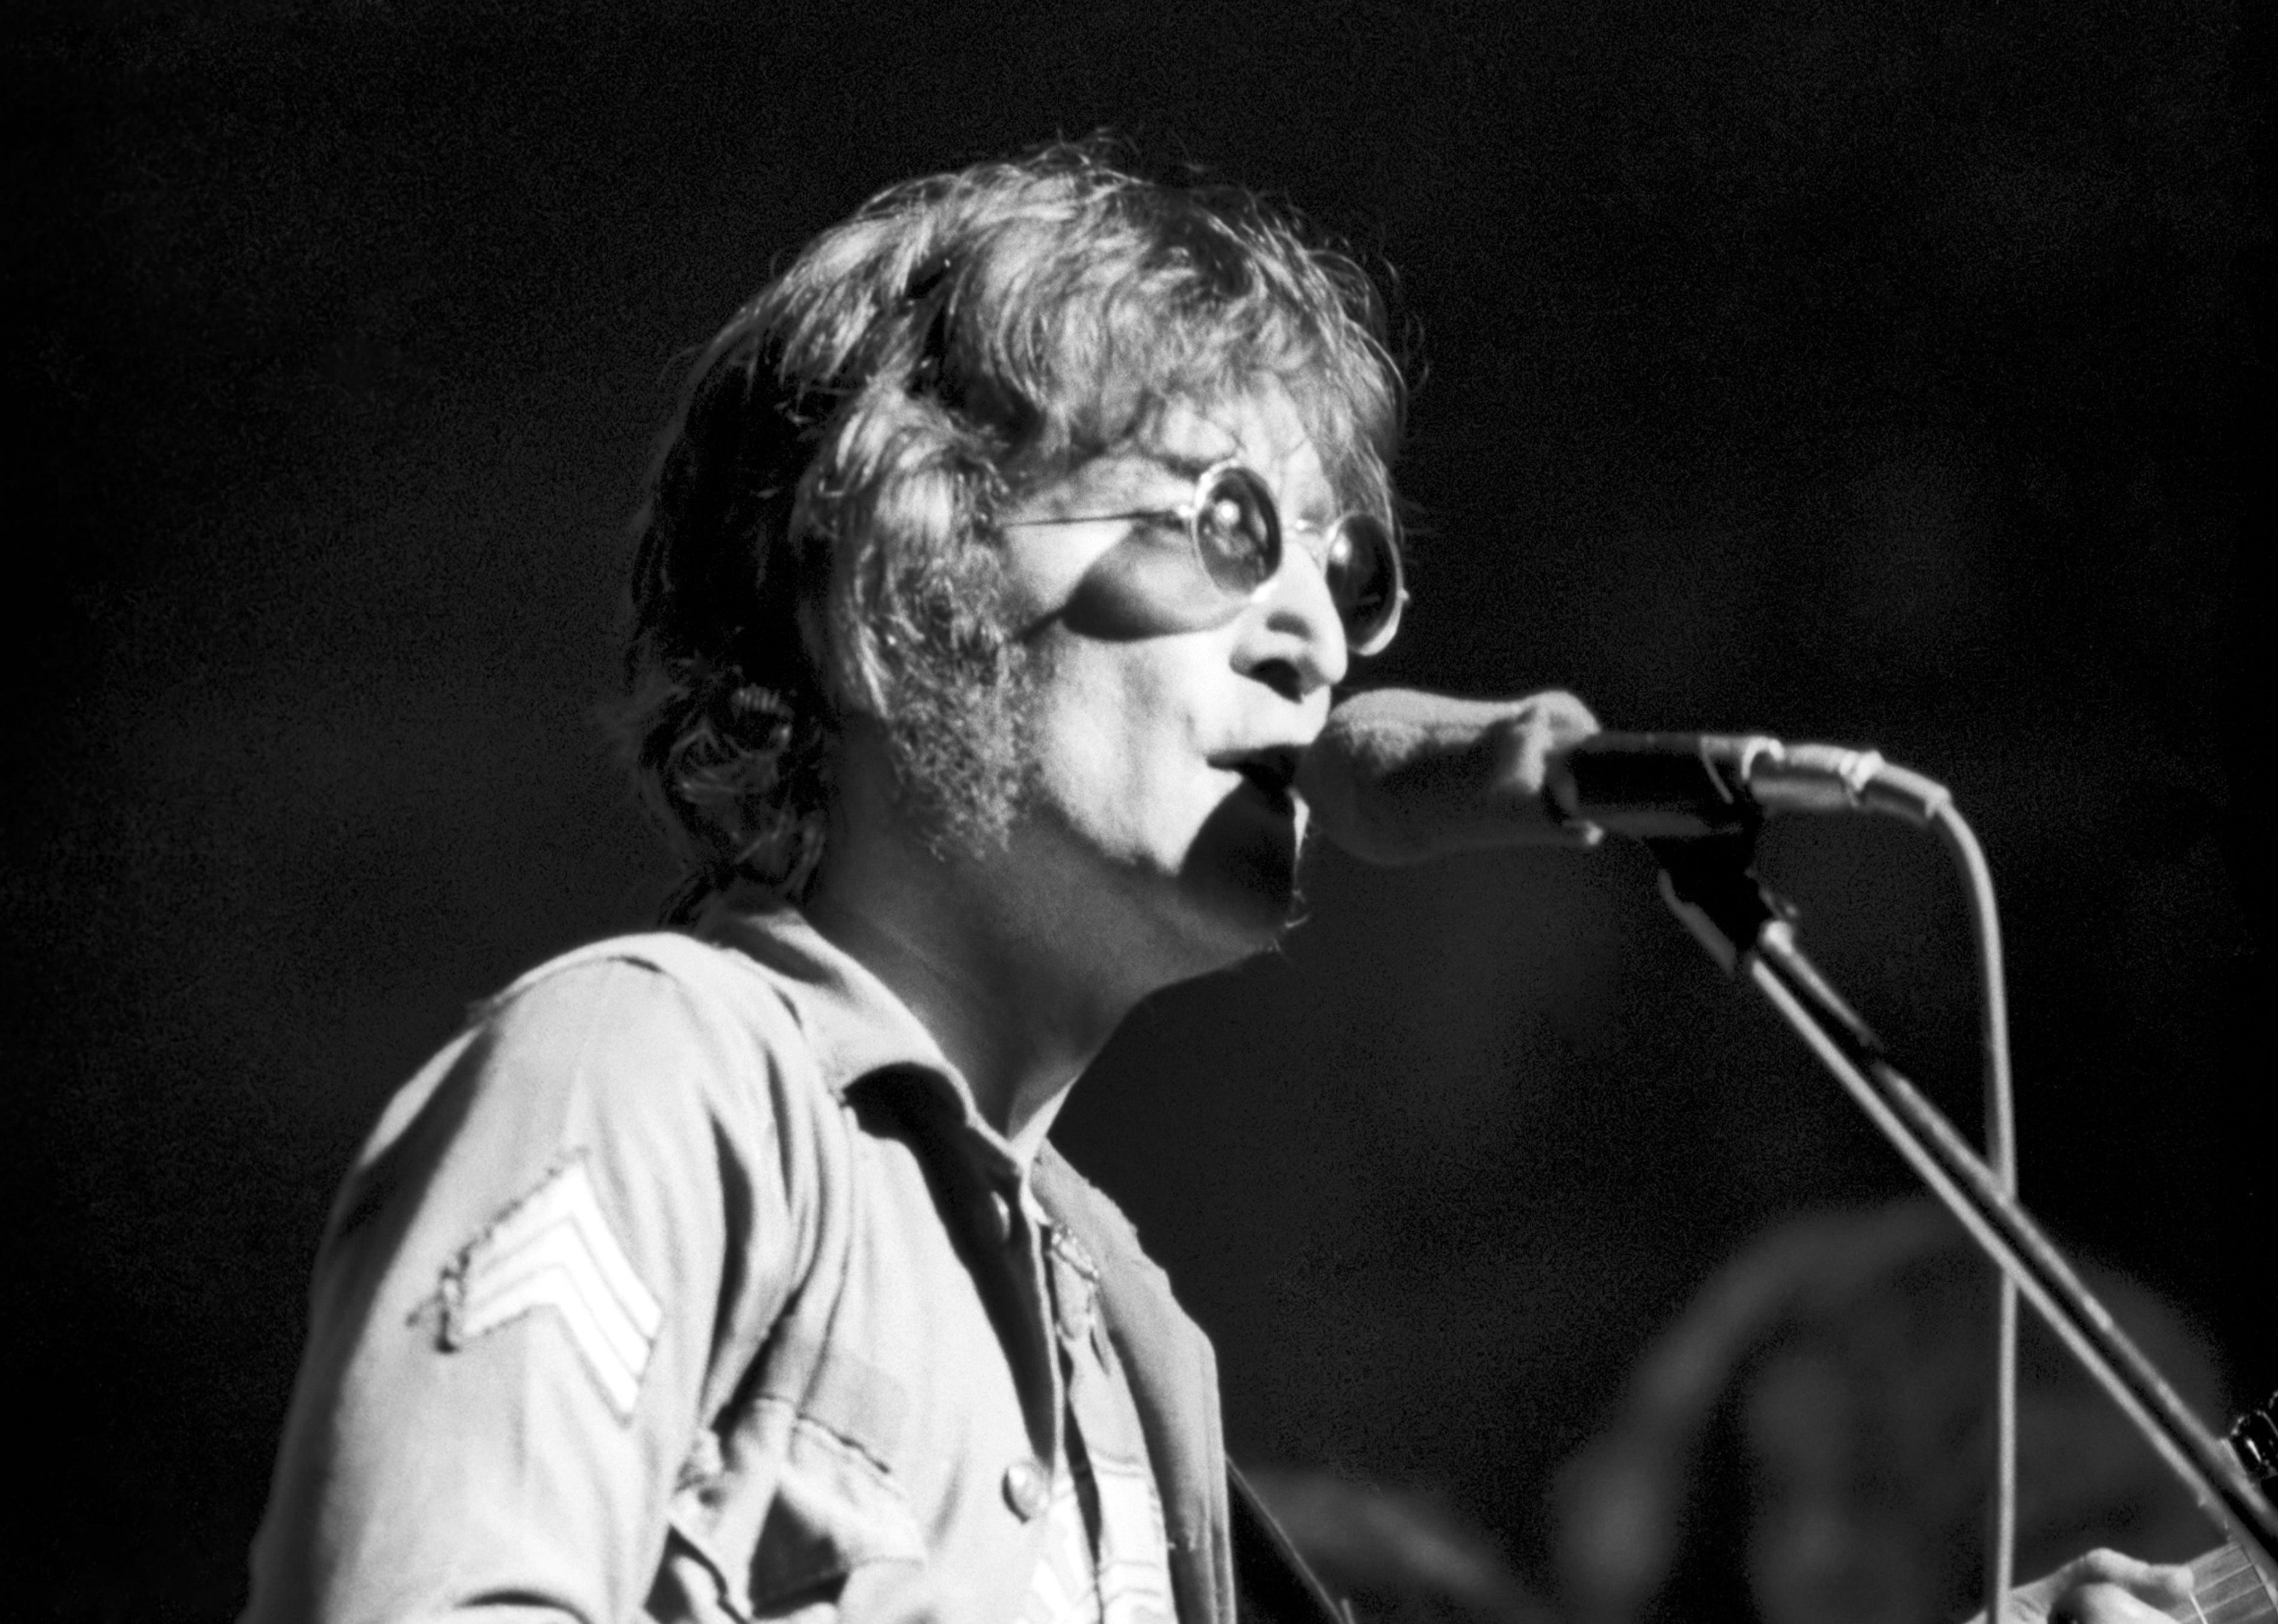 John Lennon performing in his signature round glasses and military style jacket.